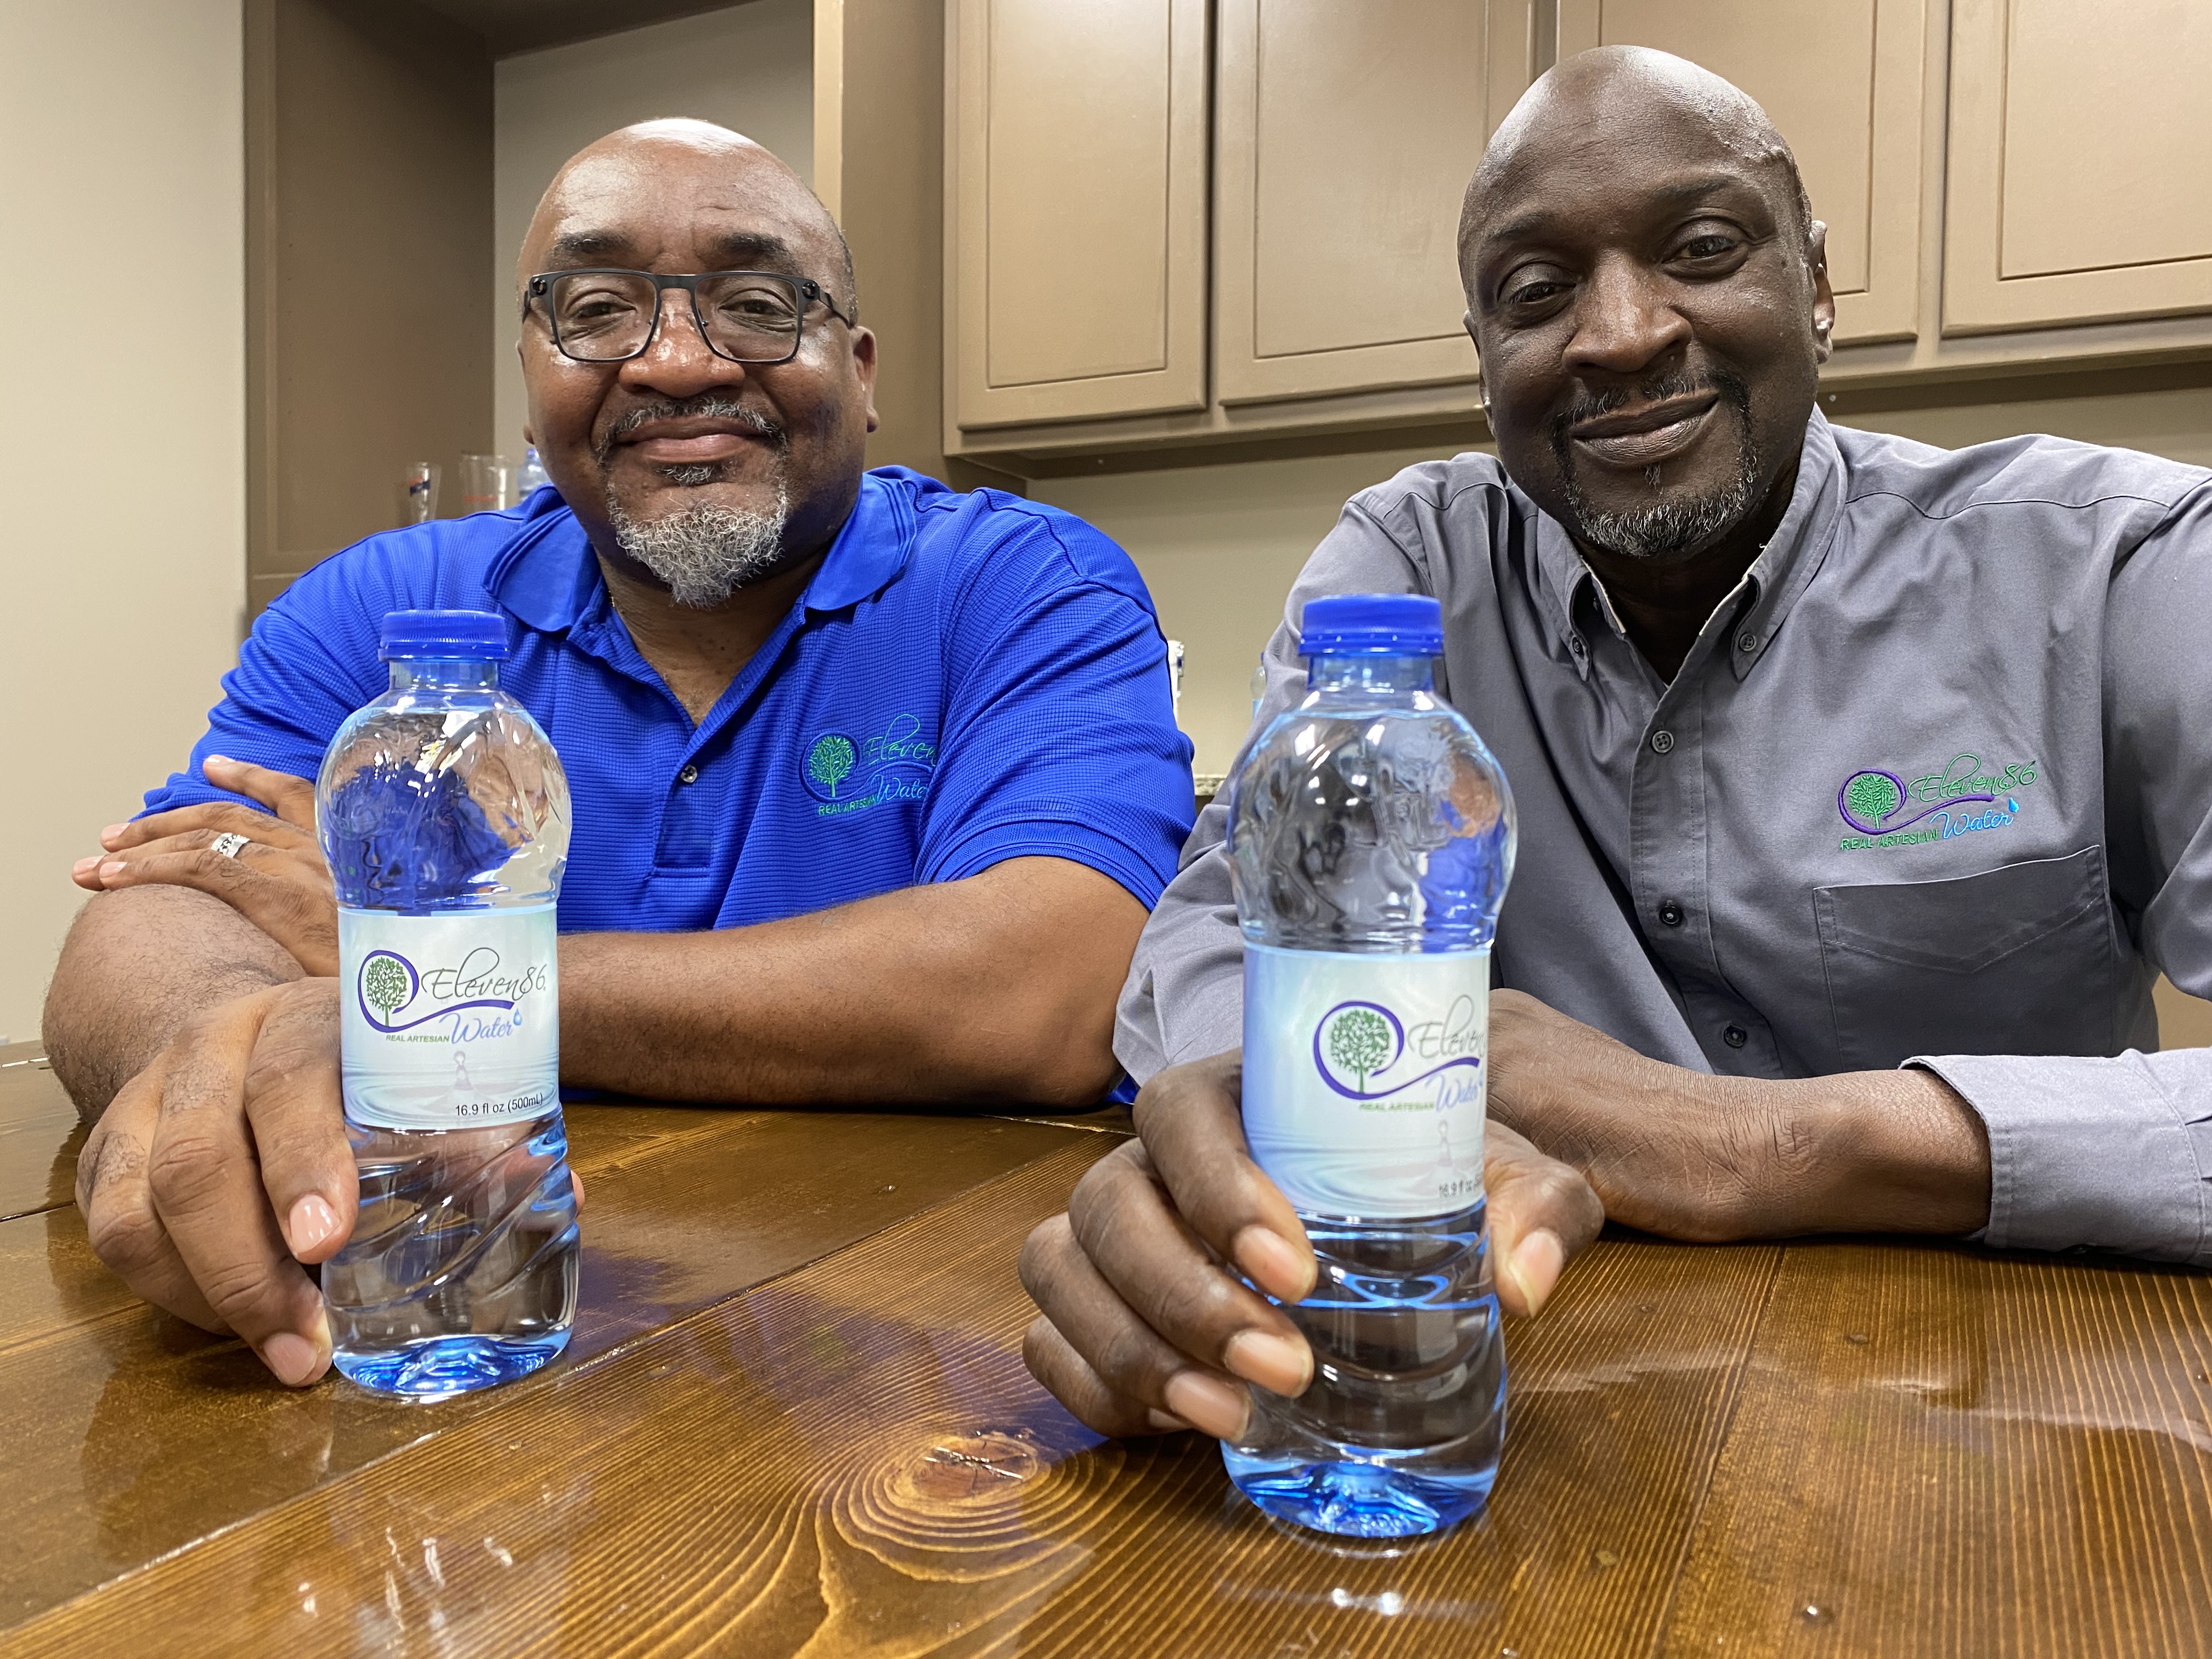 40-Ounce Bottled Water Proves Controversial in Communities